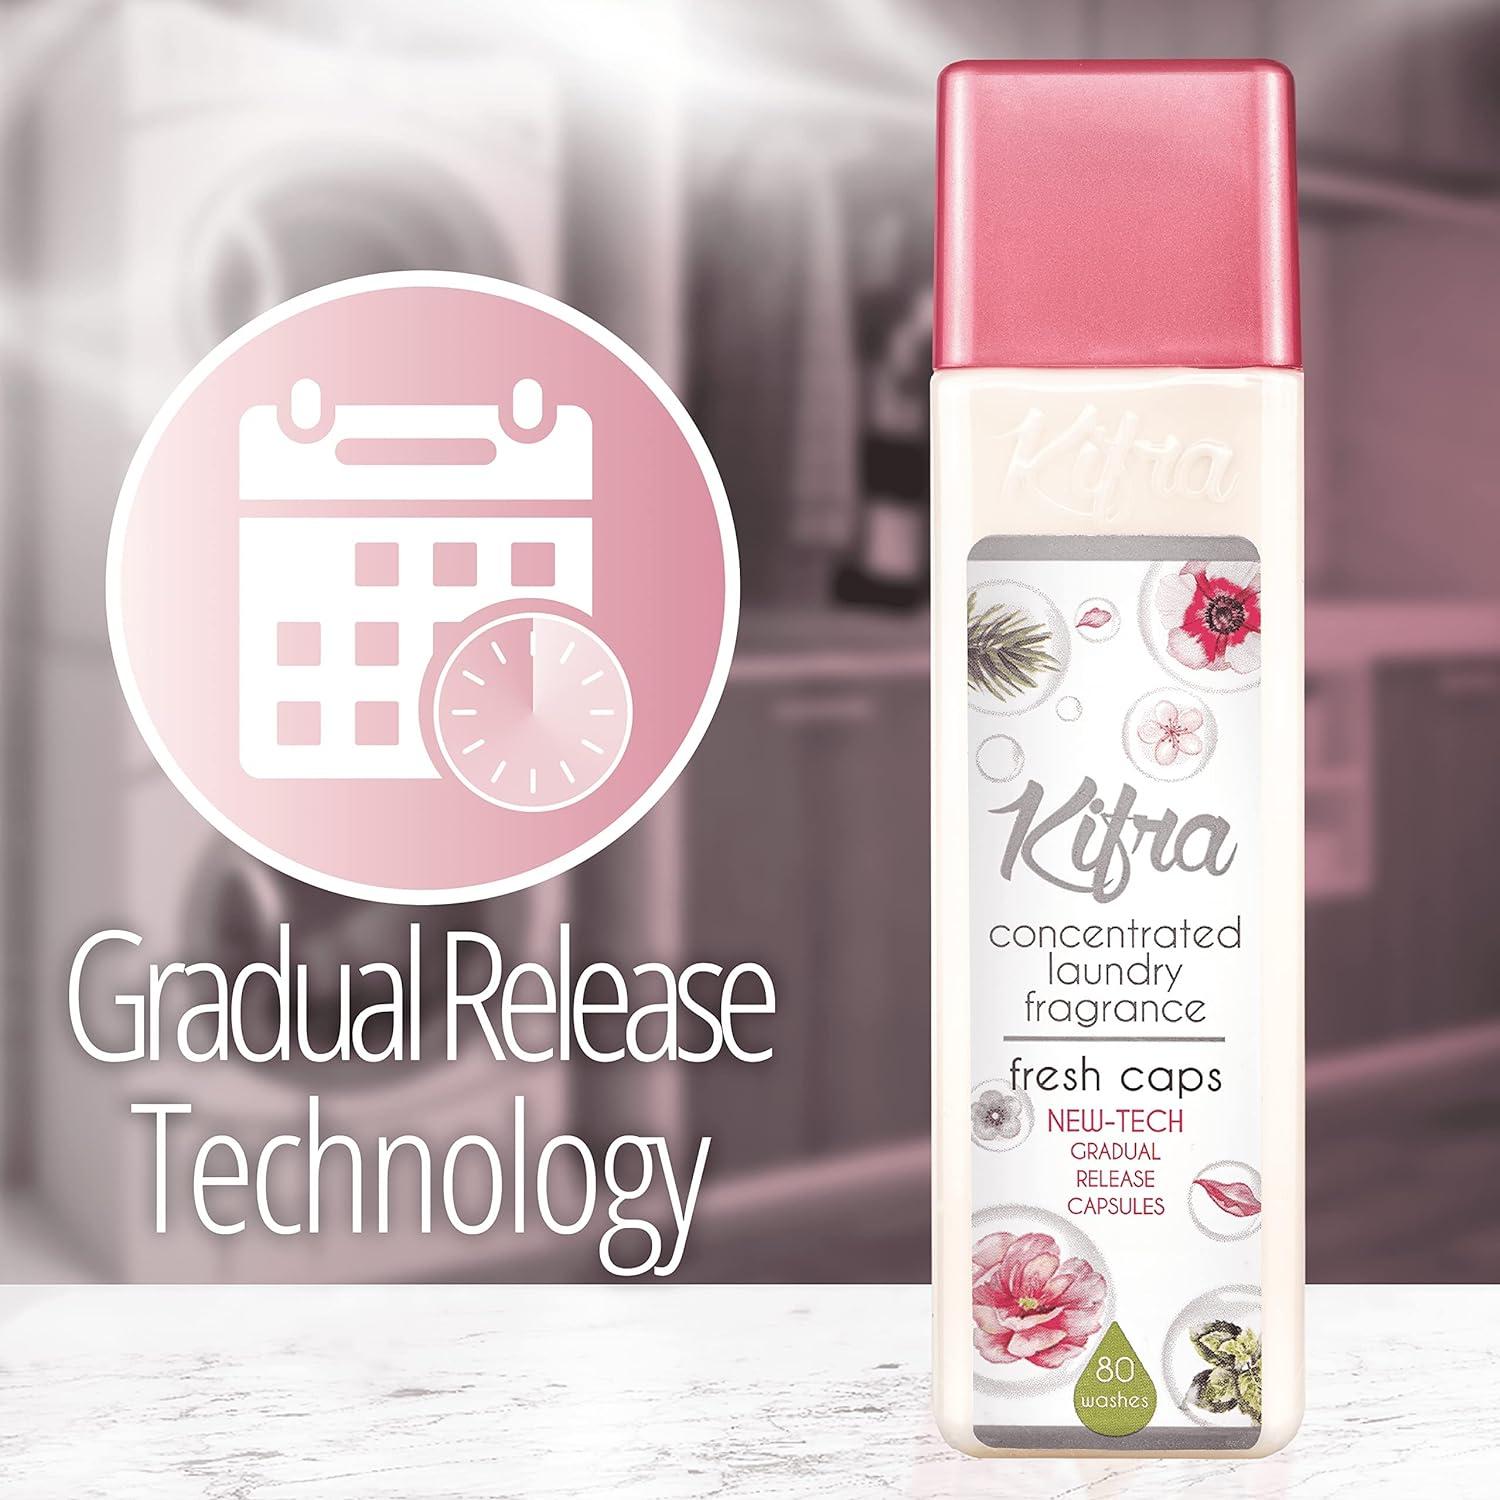 KIFRA CARING Concentrated Laundry Fragrance  